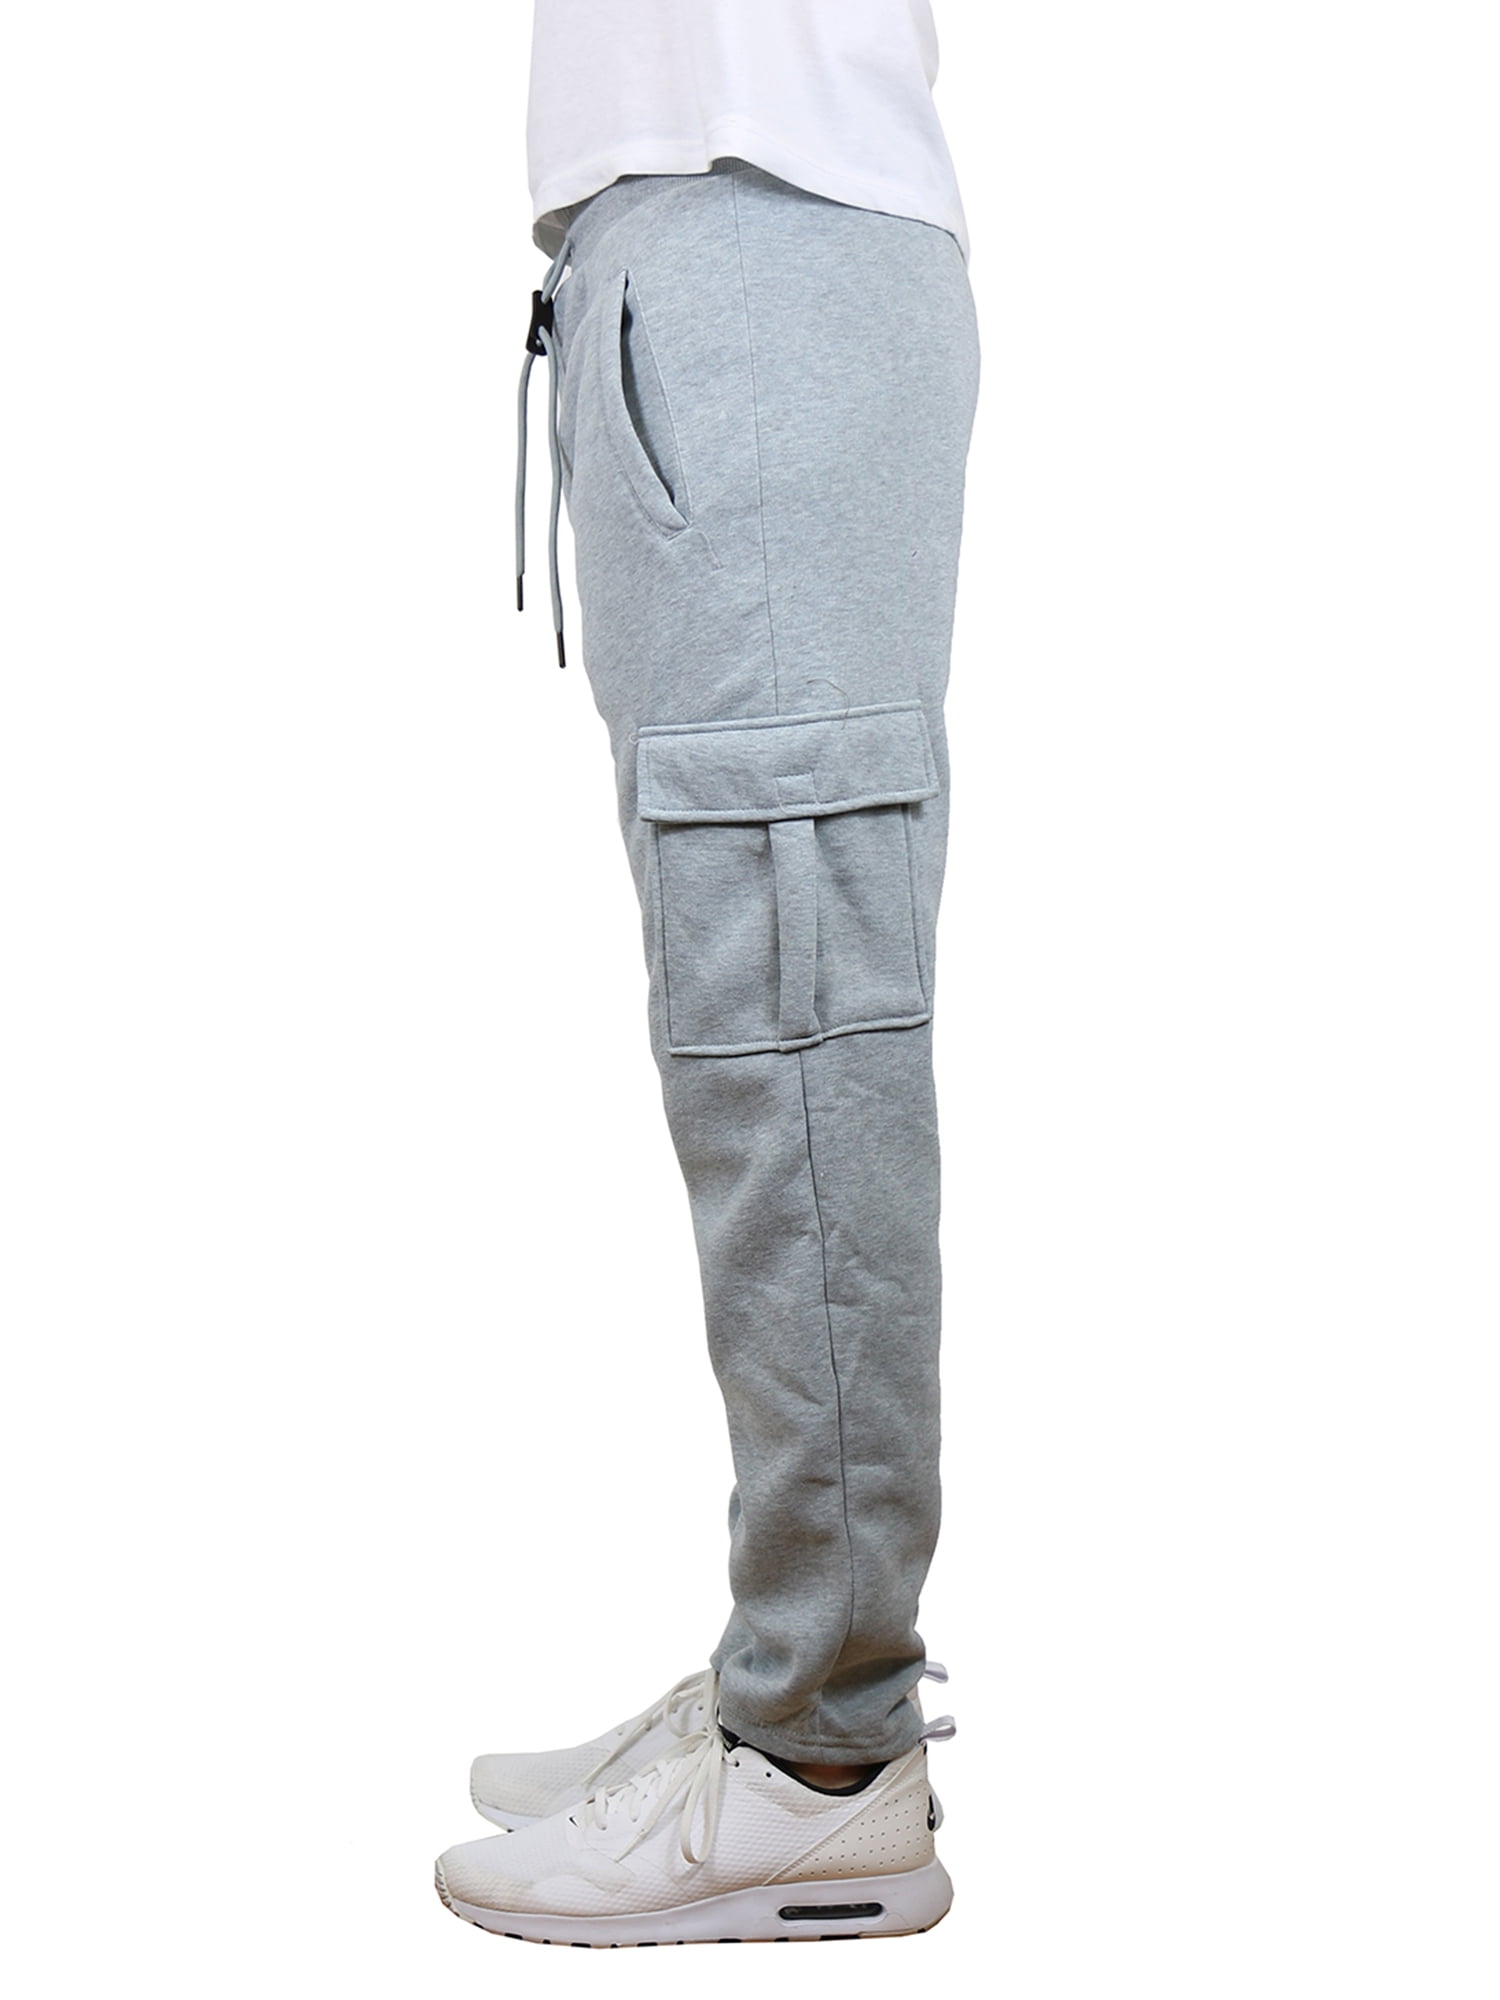 2 Piece French Terry Sweatshirt and Sweatpants S-XL Galaxy by Harvic Boys’ Jogger Set 